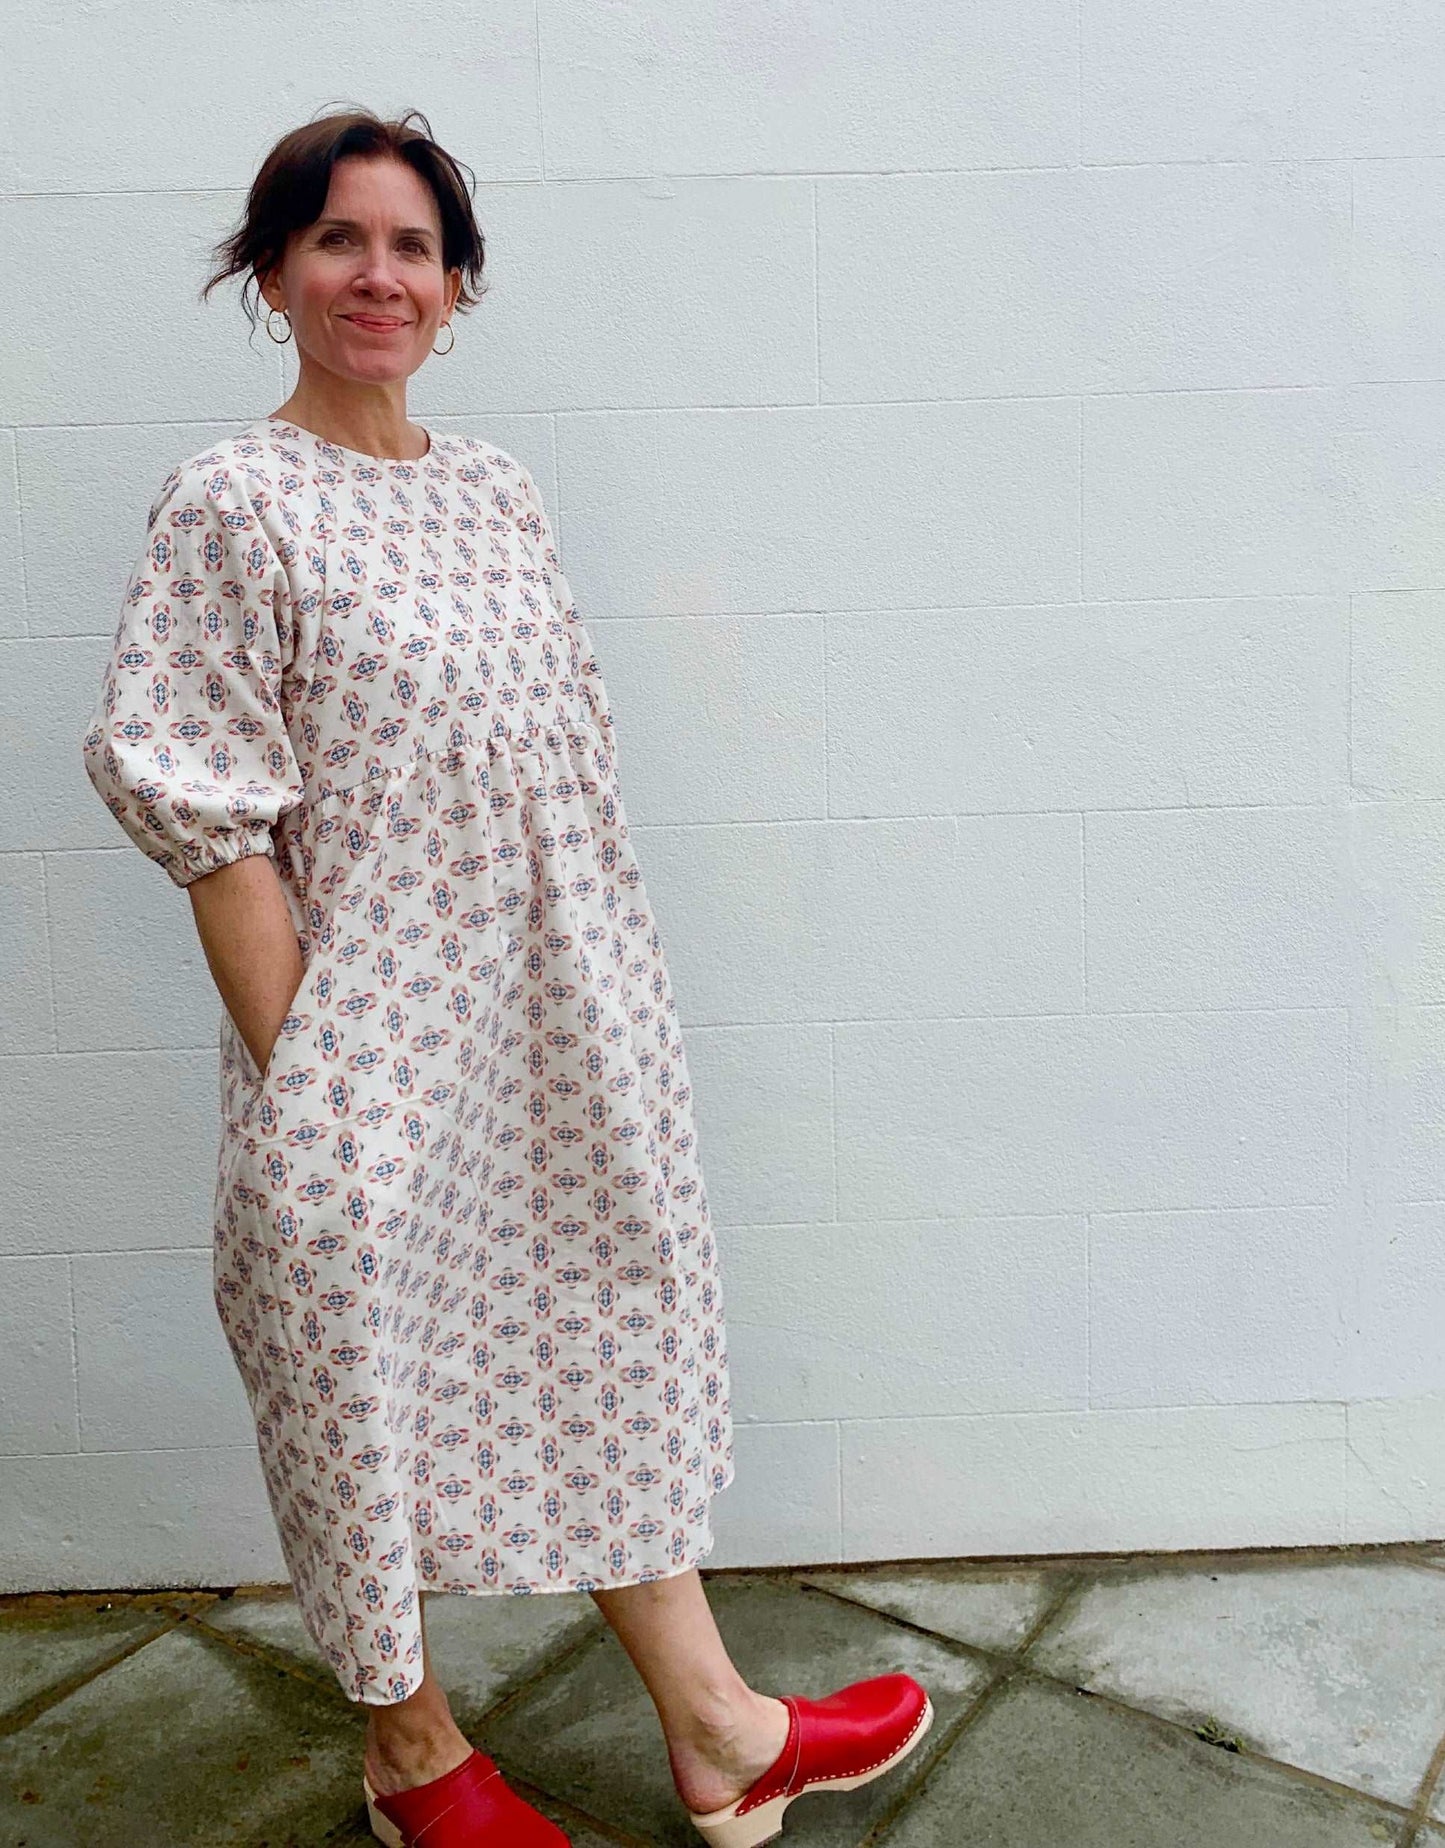 Cream brushed cotton dress with pockets wearing red clogs